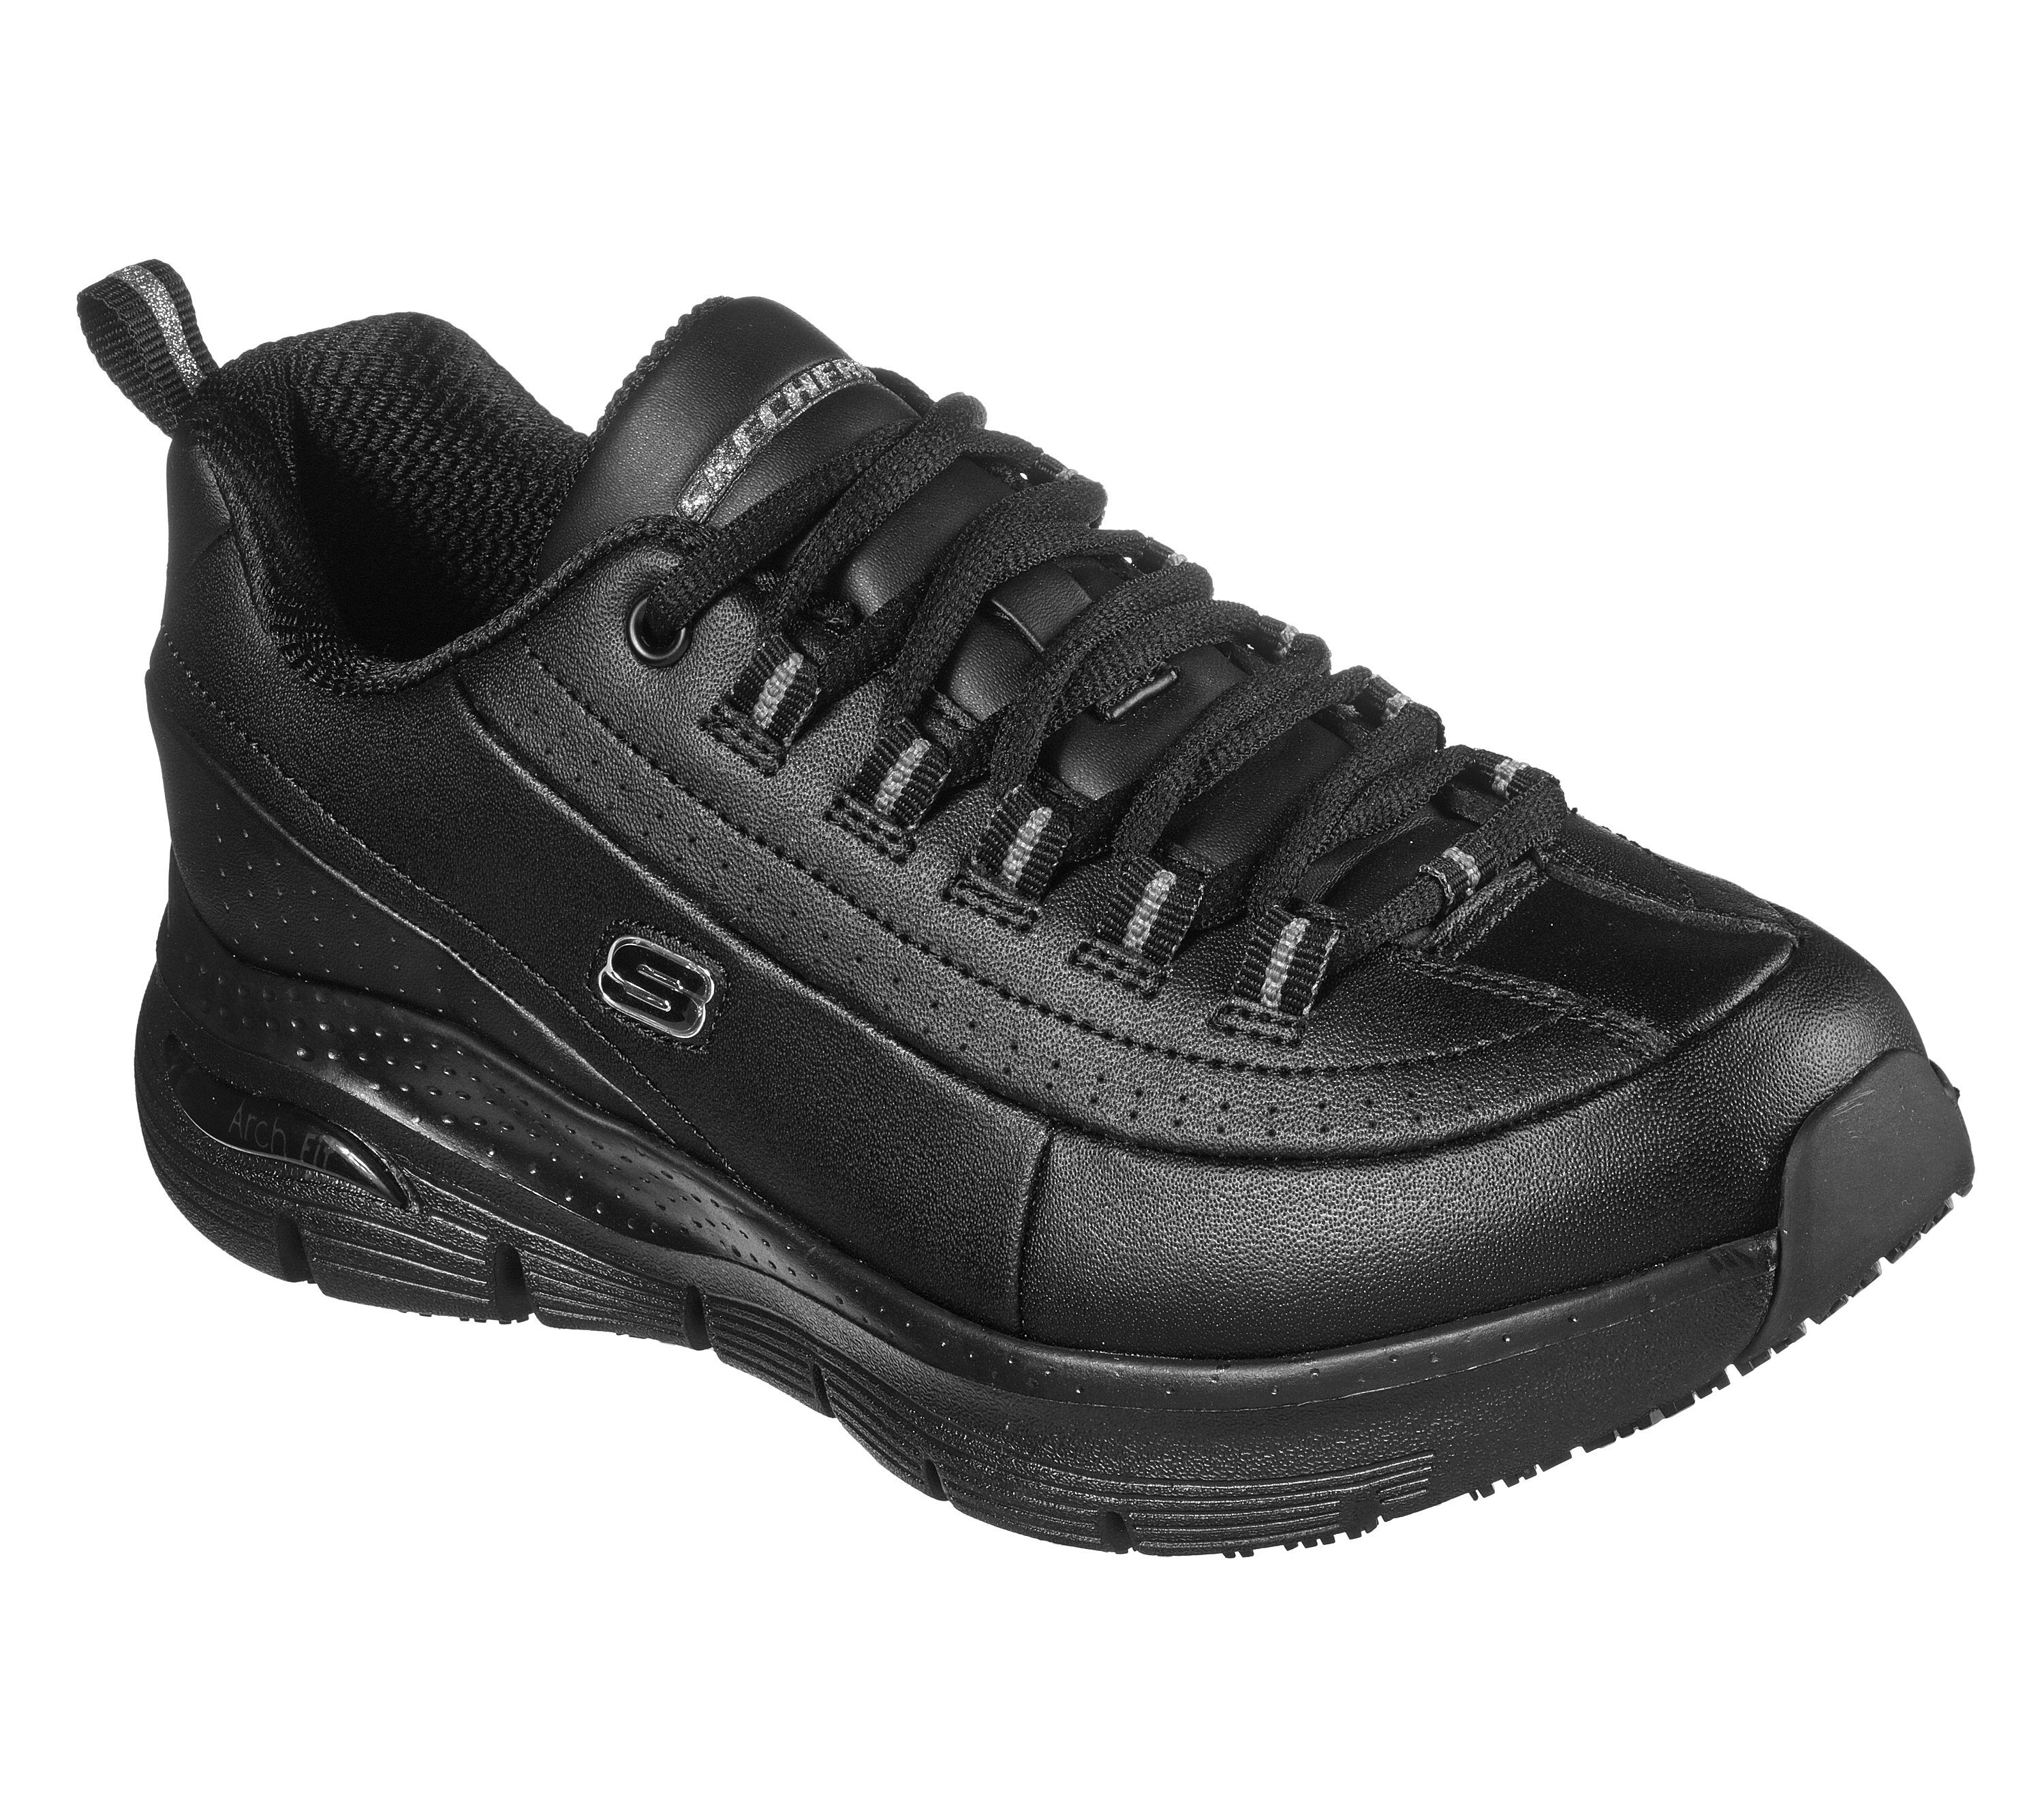 skechers safety shoes ladies uk